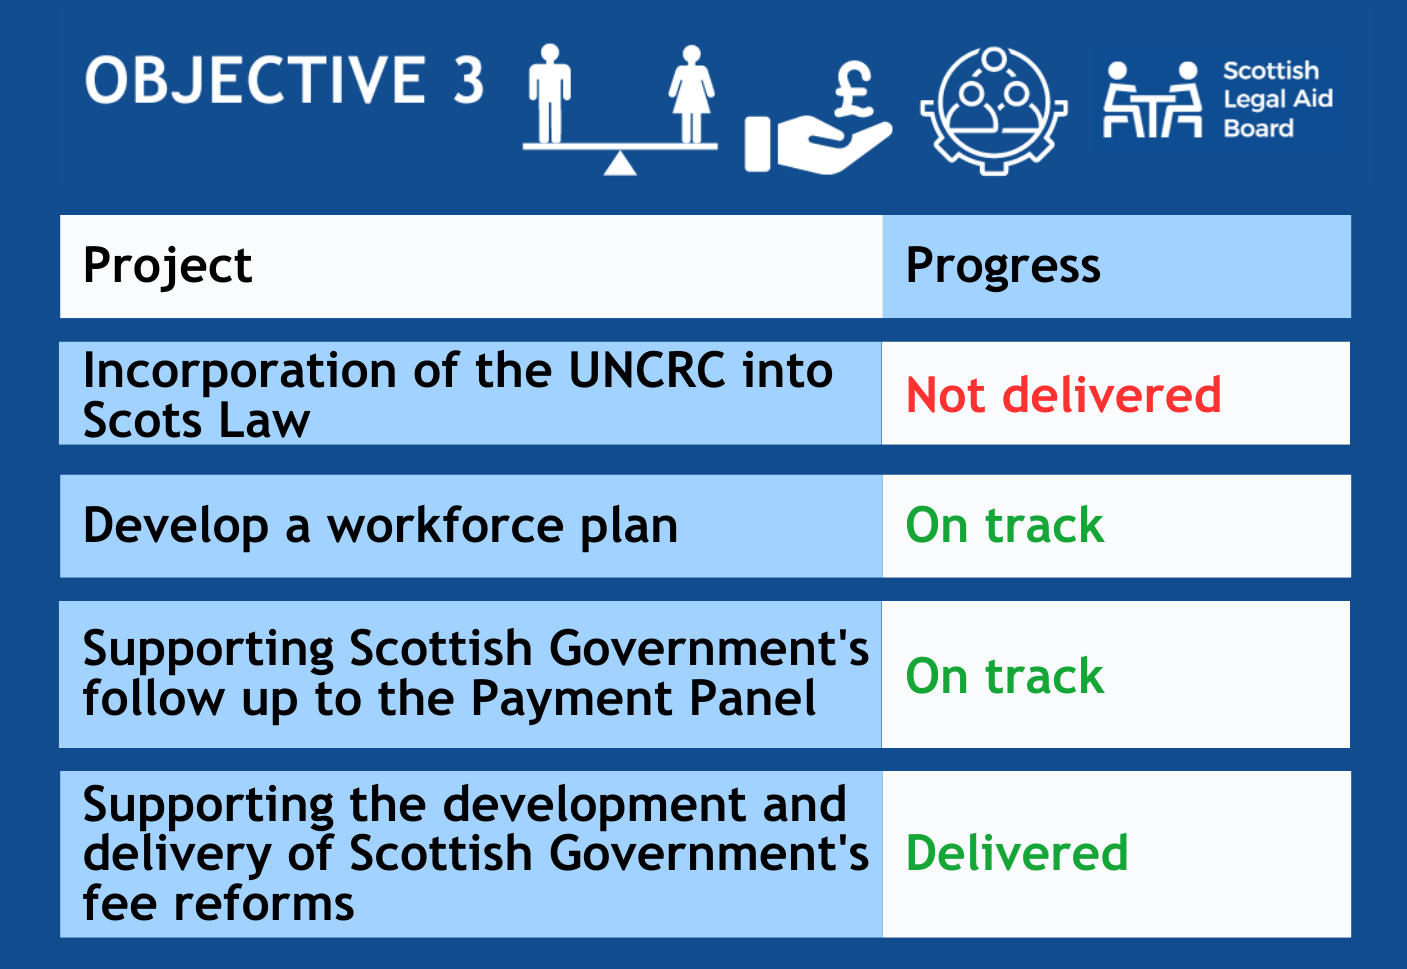 Visual of Objective 3 project progress: Incorporation of UNCRC into Scots Law equals Not delivered, Develop a workforce place equals On Track, Supporting Scottish Government’s follow up to Payment Panel equals On Track and Supporting the development/delivery of Scottish Government’s fee reforms equals Delivered.